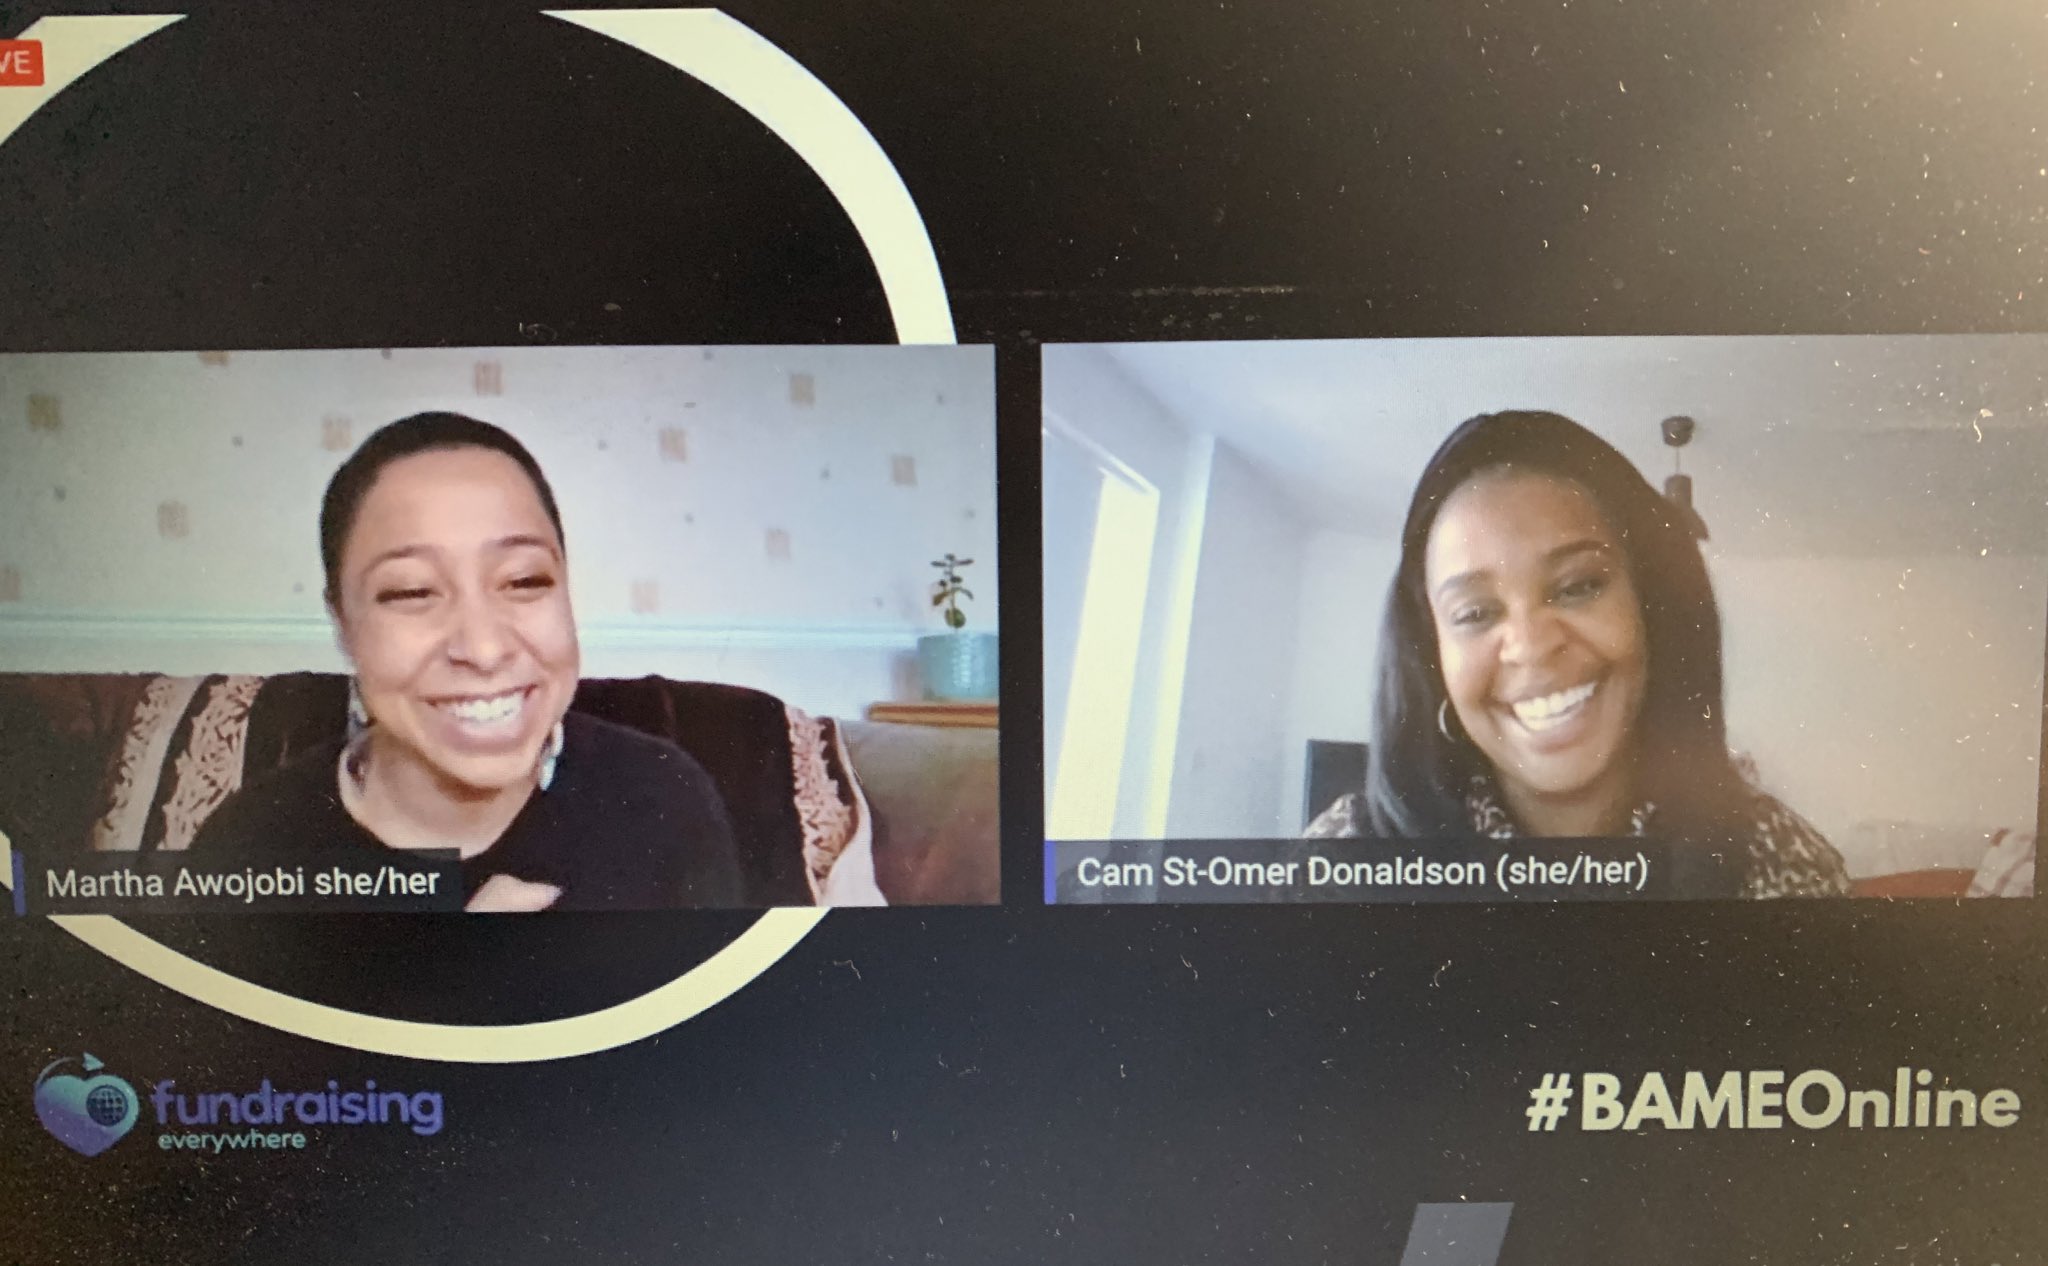 Screenshot from the BAME fundraising conference with two people smiling